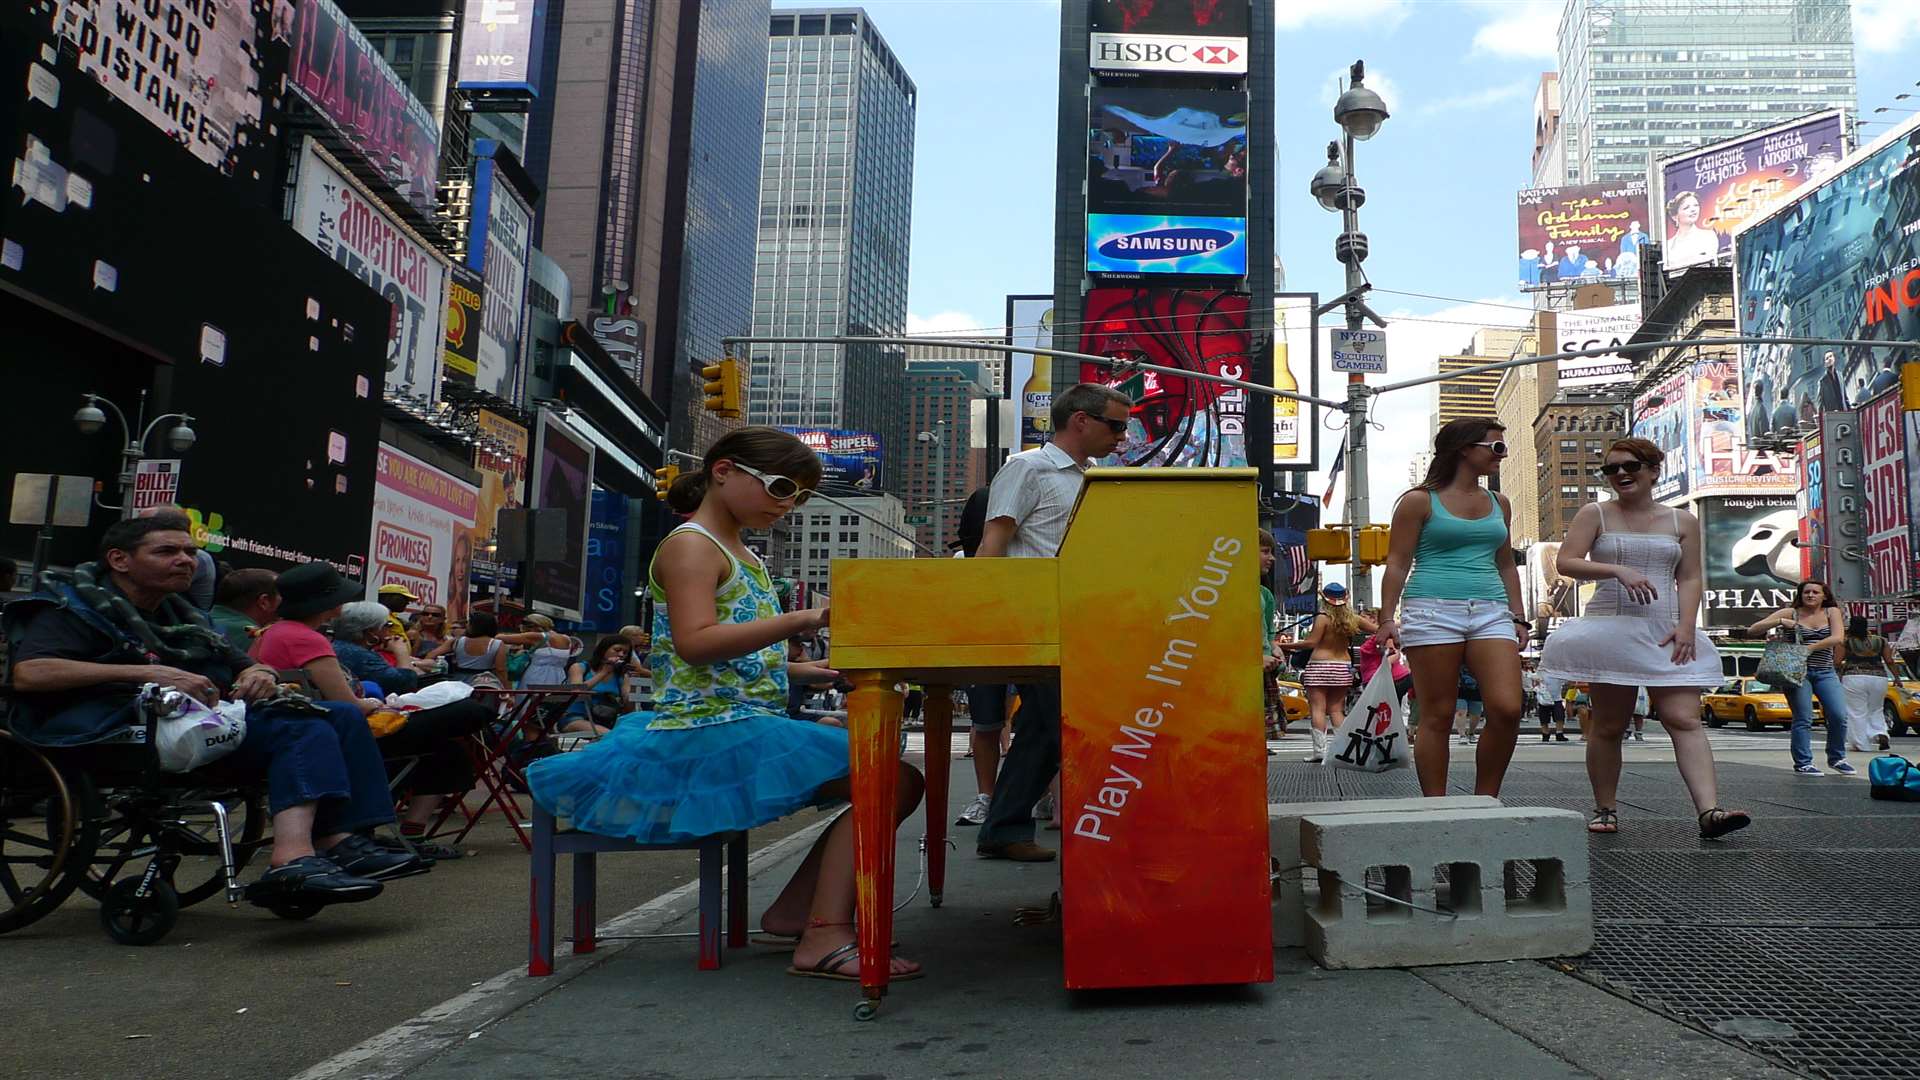 The Play Me I'm Yours phenomenon comes to Canterbury, having been around the world including New York, with pianos set to appear across the city